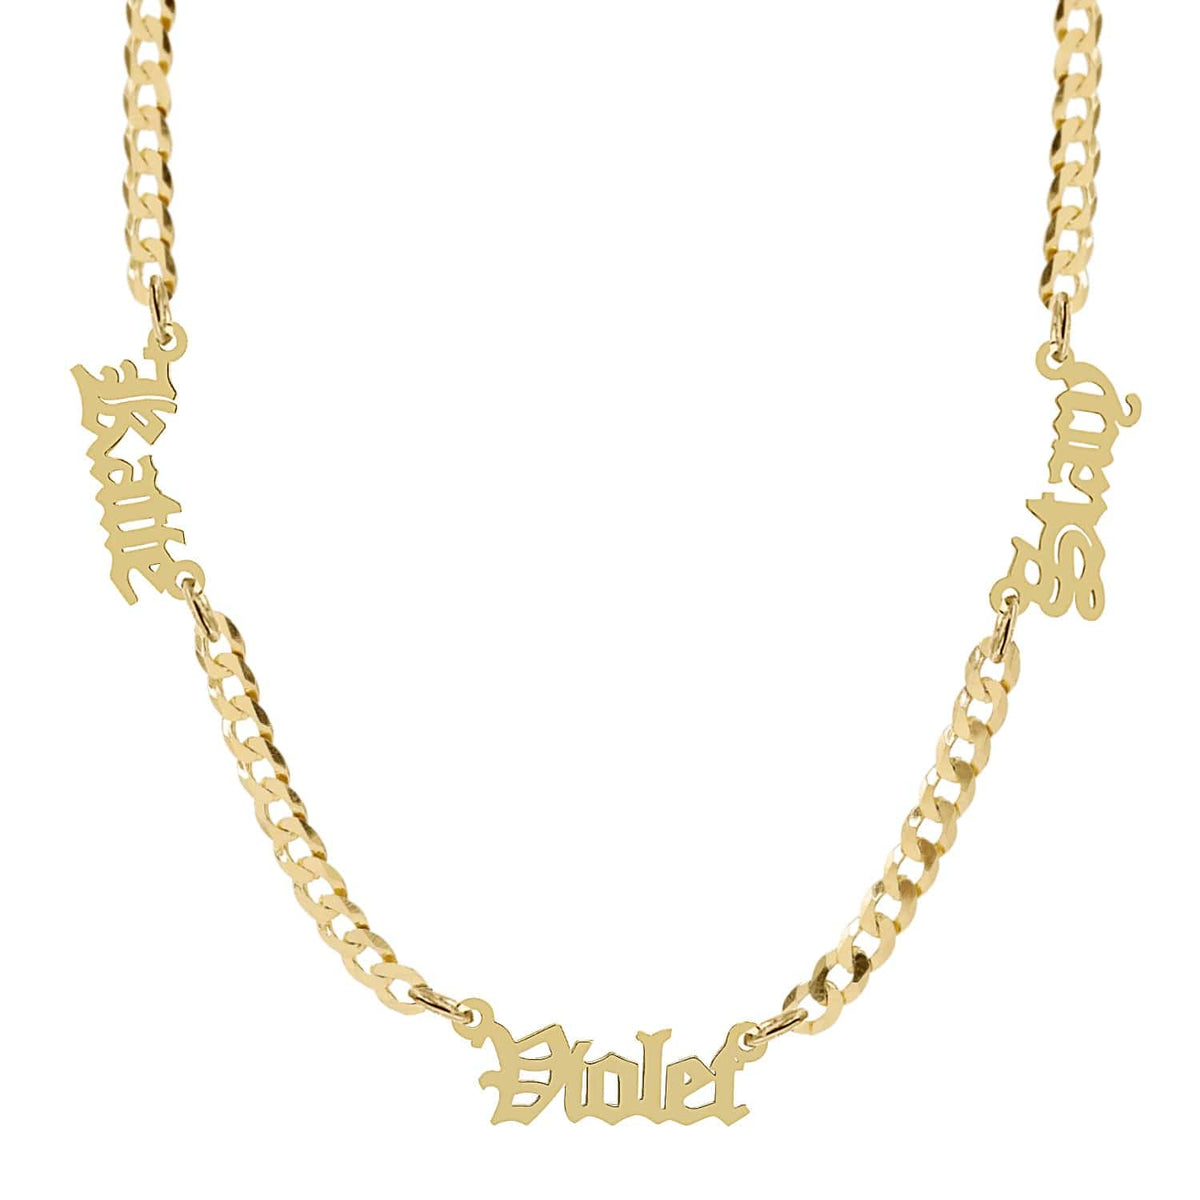 14k Gold over Sterling Silver / Cuban Chain Personalized Nameplate Necklace w/ Three Gothic Names on Cuban Chain